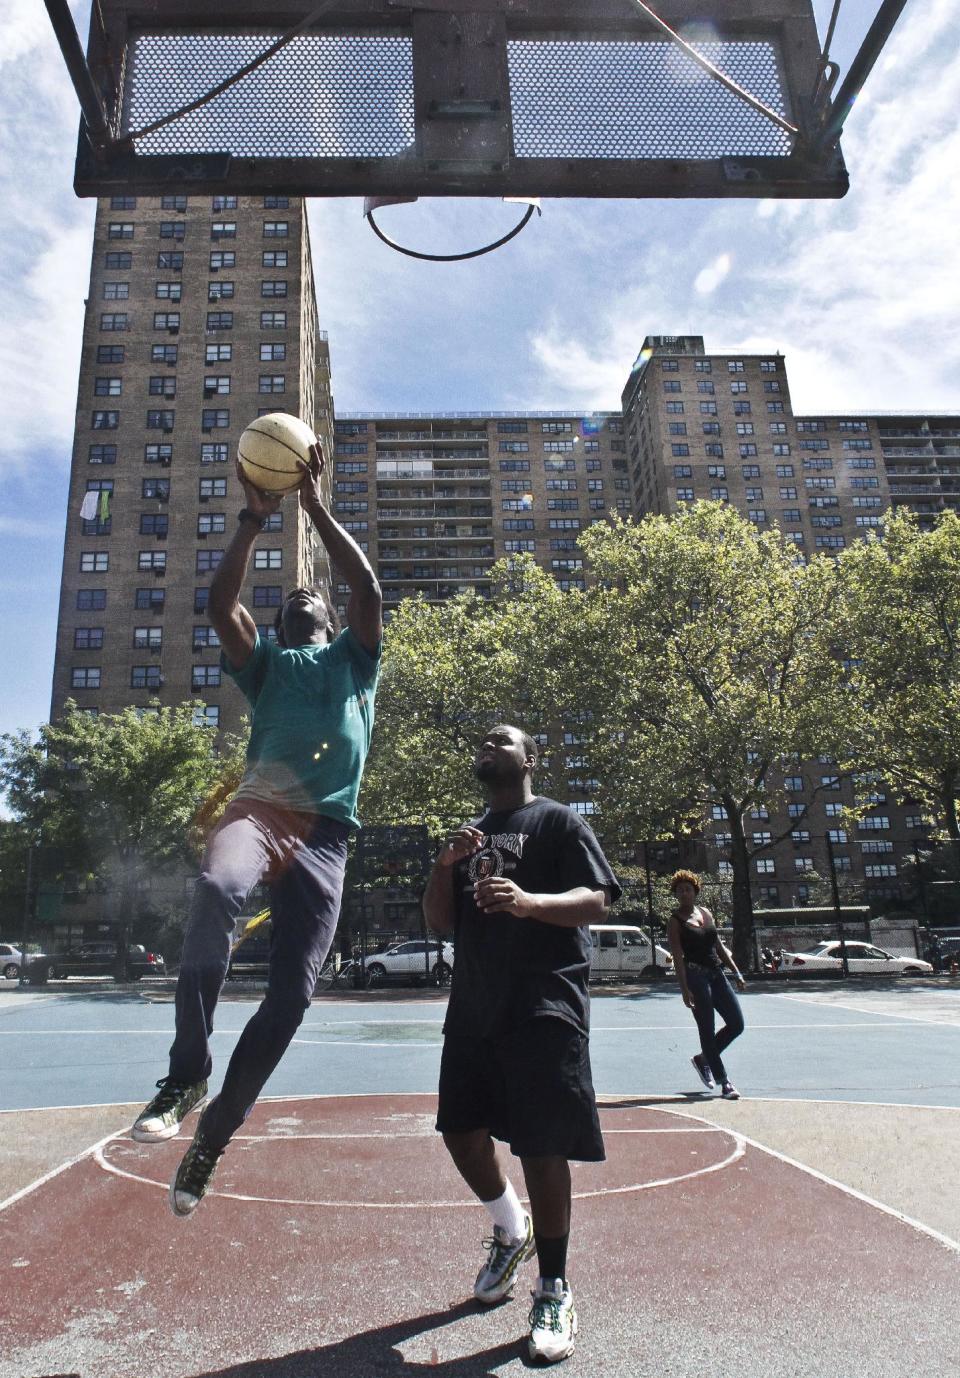 Eric Johnson, left, 19, and Mario Volcin, 23, play basketball in the Jackie Robinson Playground as the Ebbets Field apartments looms in the background, on Wednesday, Sept. 19, 2012 in Brooklyn, N.Y. Ebbets Field, home to the Brooklyn Dodgers baseball decades ago, became a sprawling residential complex to thousands after the Dodgers moved west. Now Brooklyn is hitting the major leagues again with a new arena and the Brooklyn Nets' NBA franchise. (AP Photo/Bebeto Matthews)